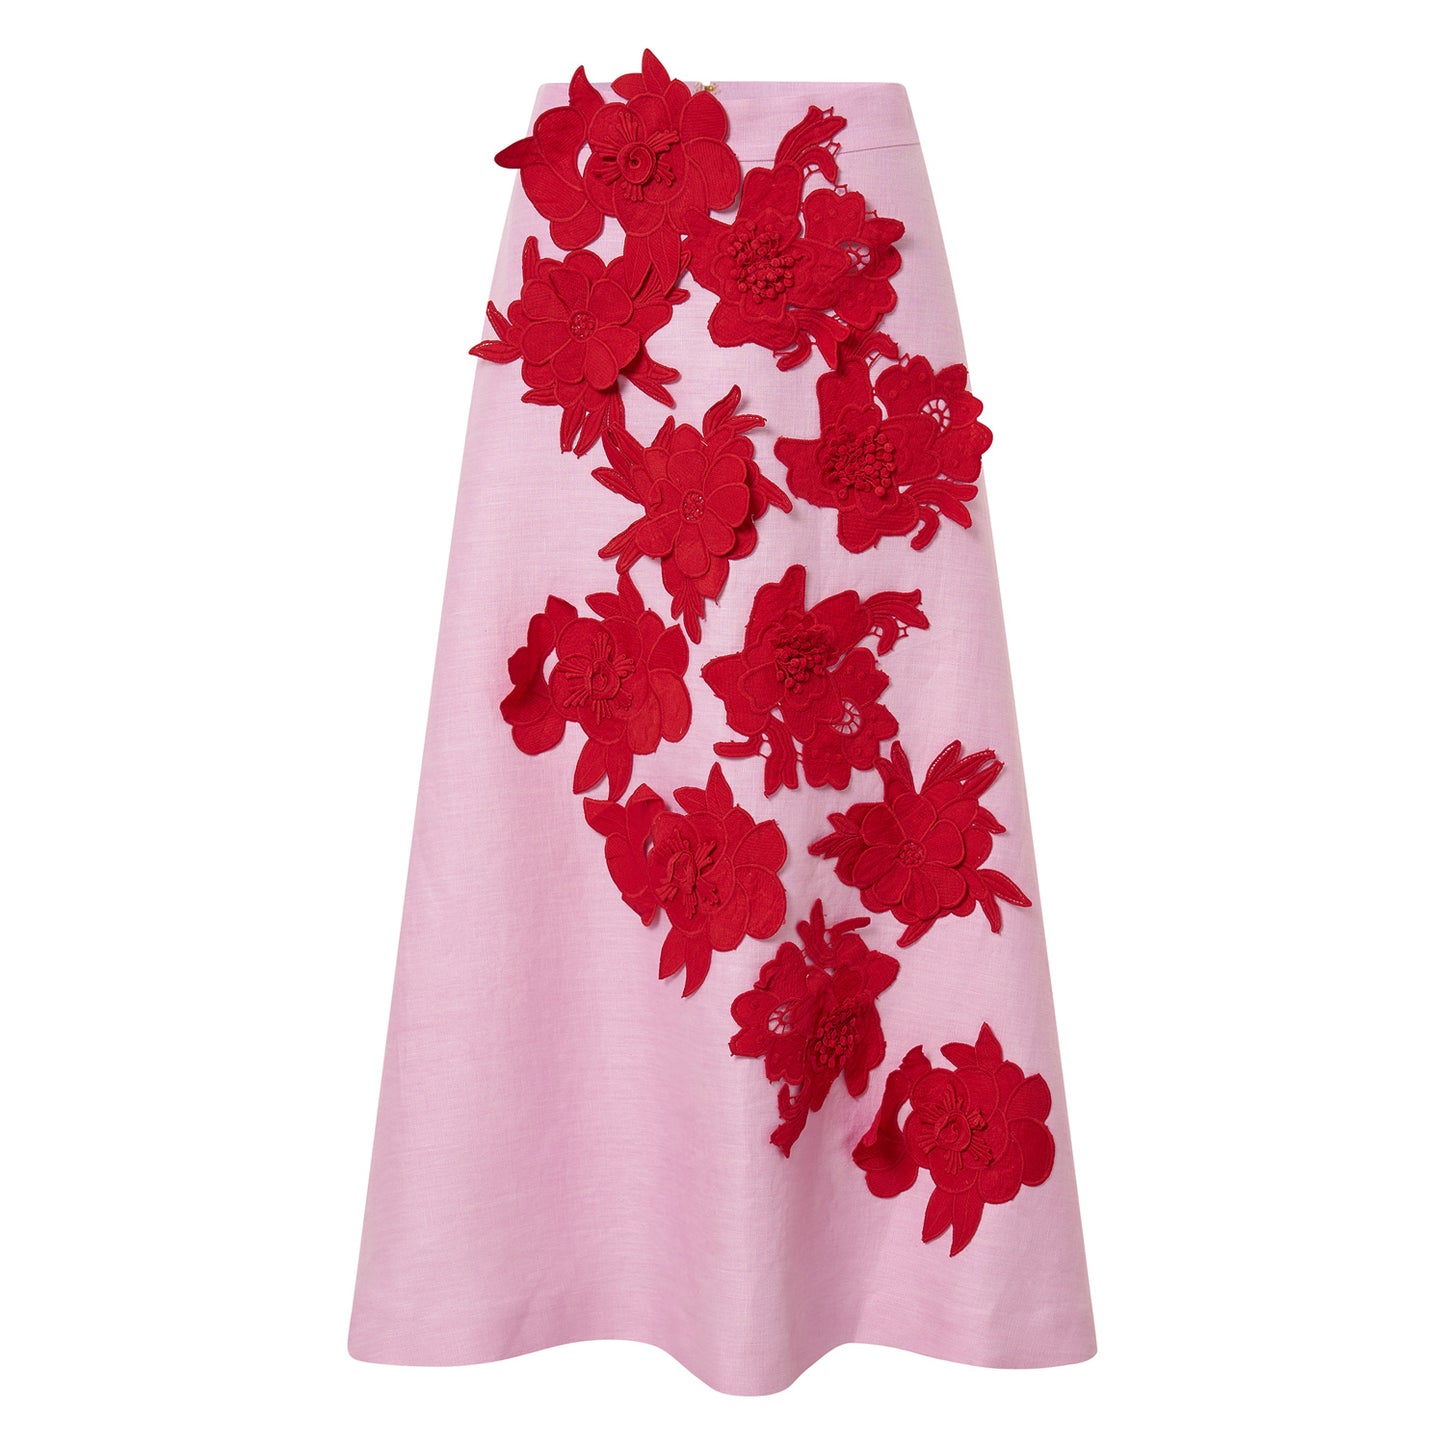 OROTON - CONTRAST 3D FLOWER A-LINE SKIRT - PINK